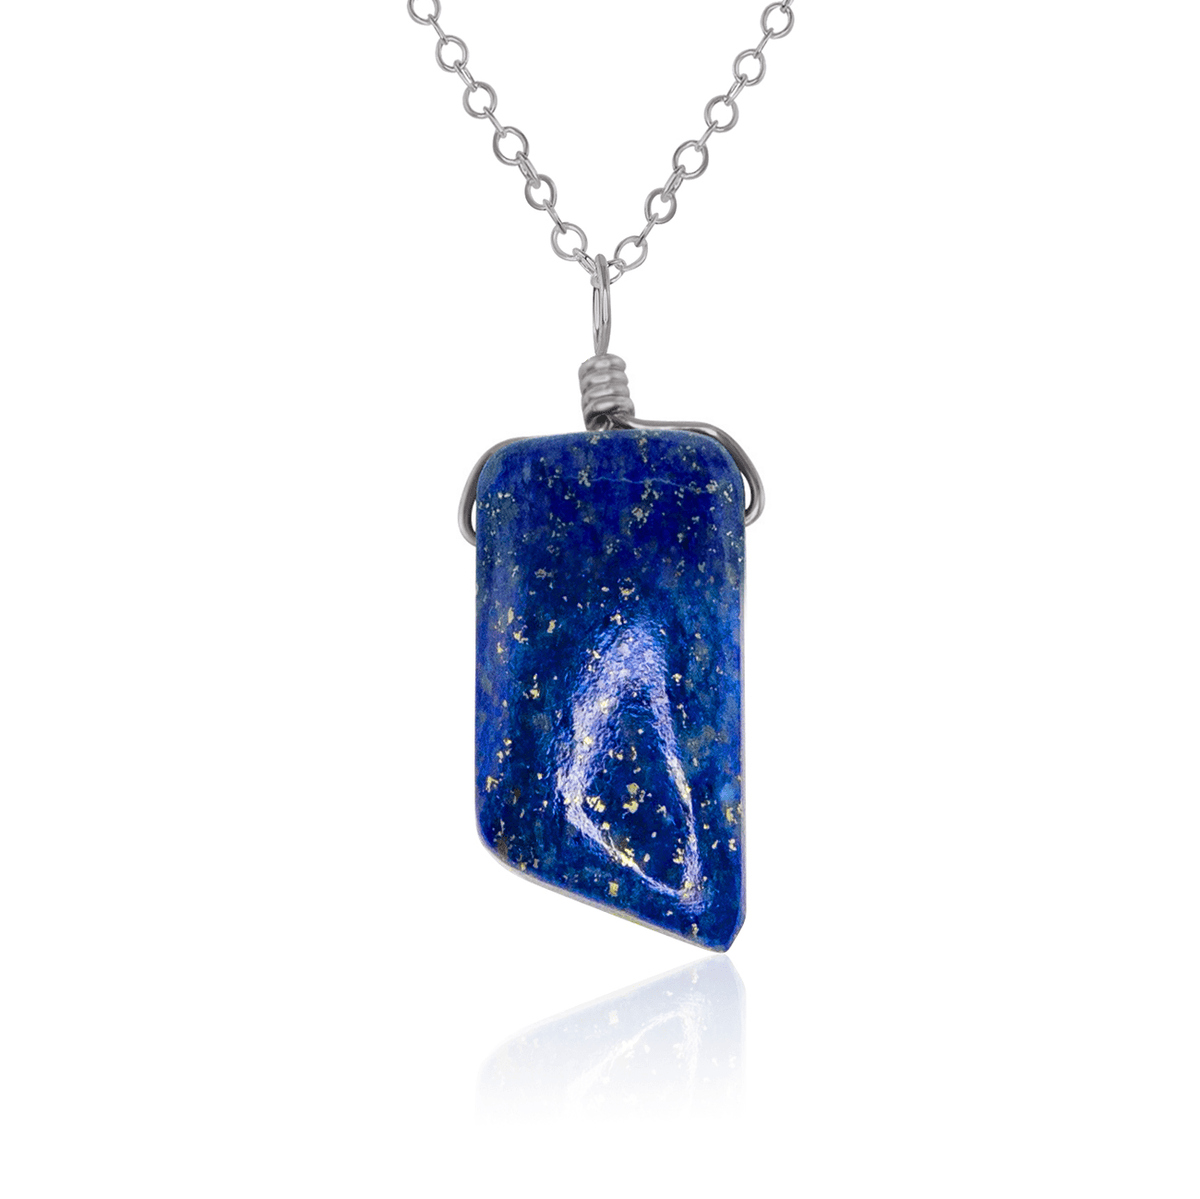 Small Smooth Lapis Lazuli Gentle Point Crystal Pendant Necklace - Small Smooth Lapis Lazuli Gentle Point Crystal Pendant Necklace - Stainless Steel / Cable - Luna Tide Handmade Crystal Jewellery